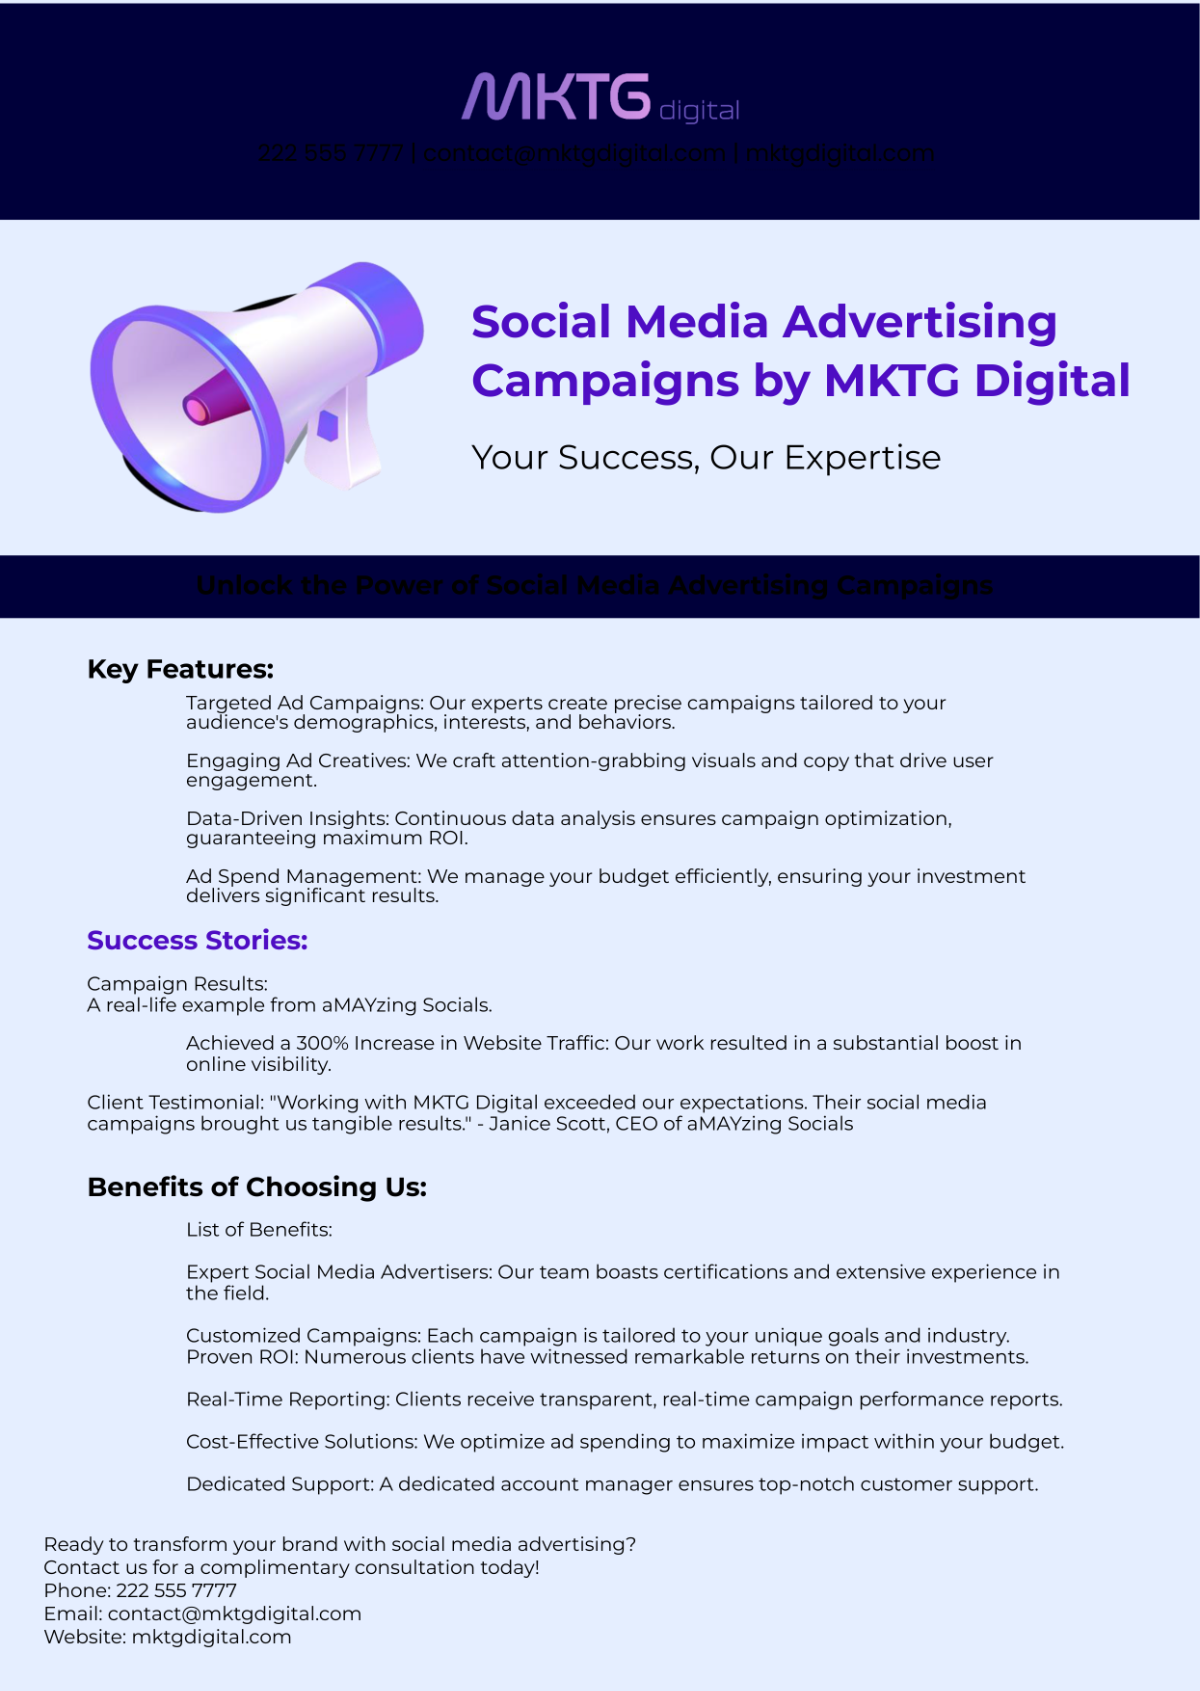 Digital Marketing Agency Product Infographic